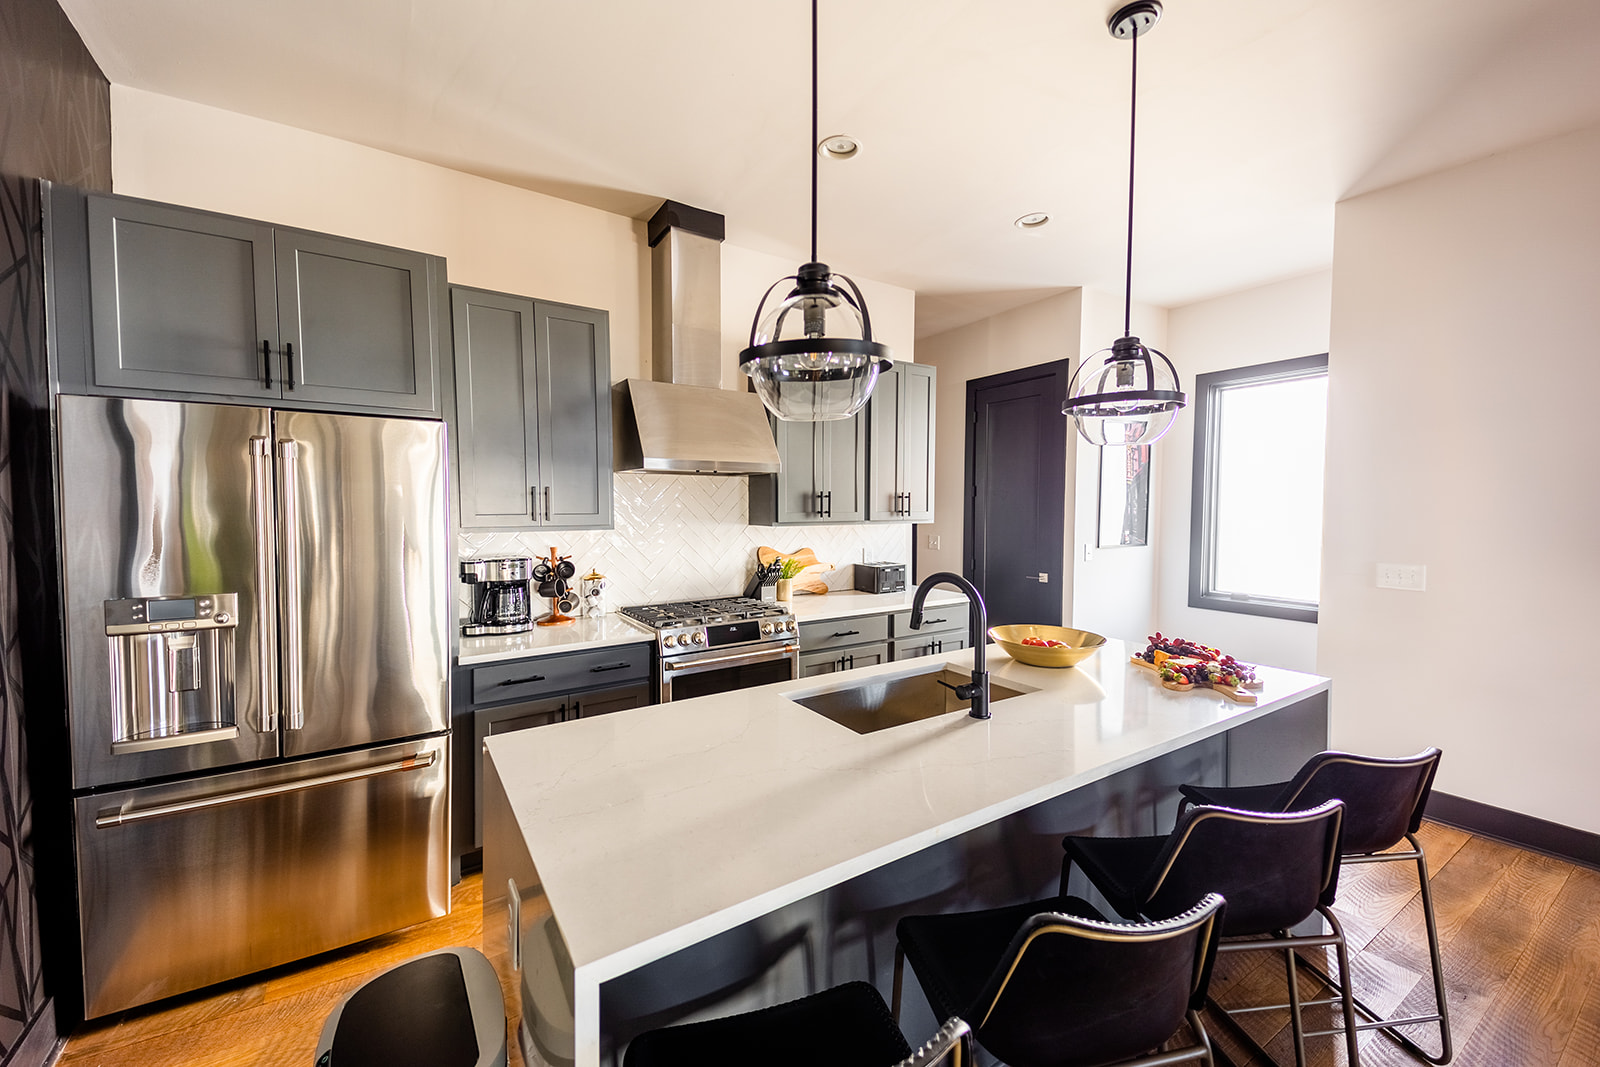 Bright open kitchen with professional stainless steel appliances and modern furnishes.